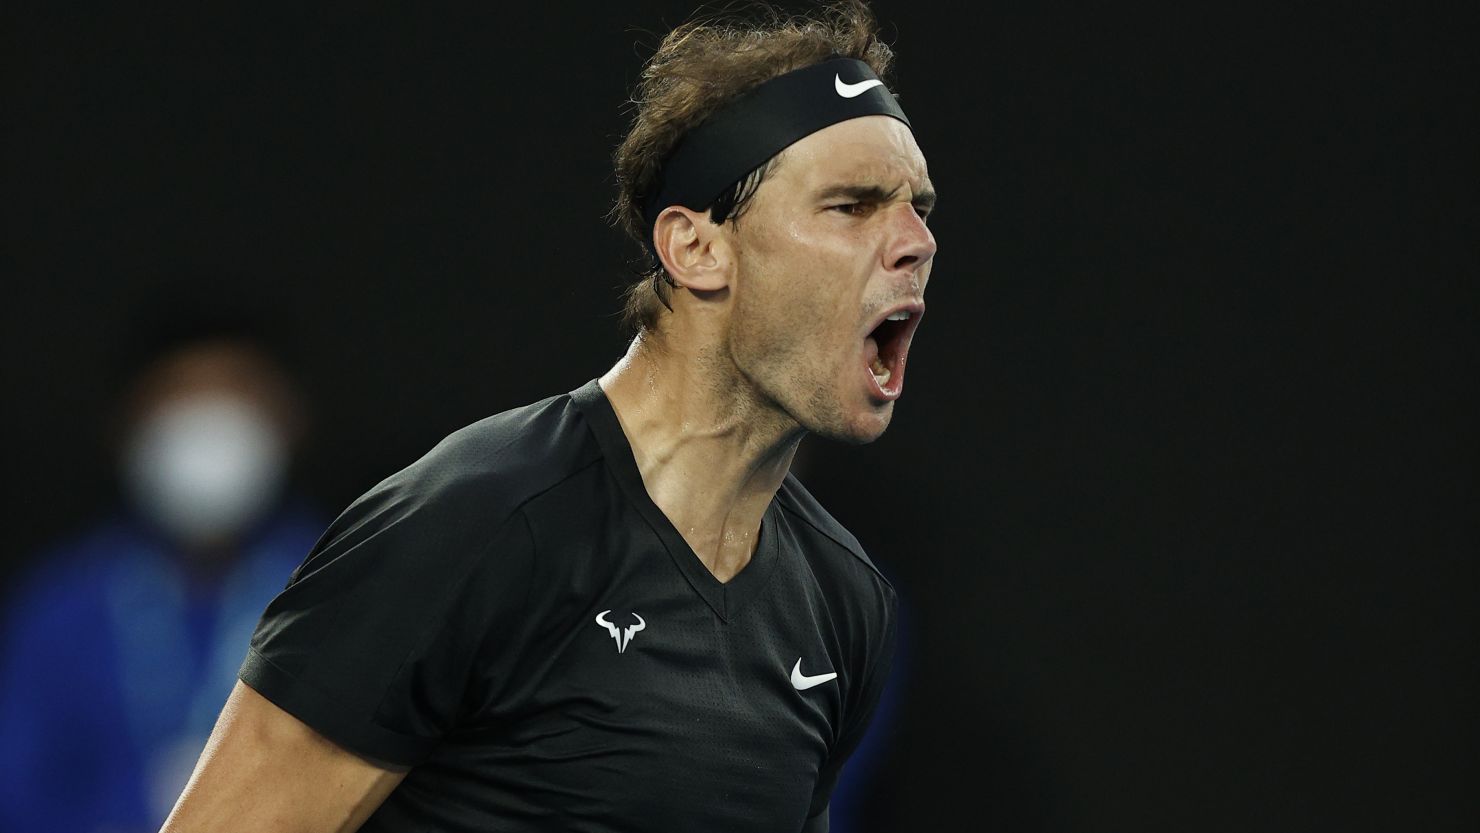 Nadal reacts during his victory against Maxime Cressy.